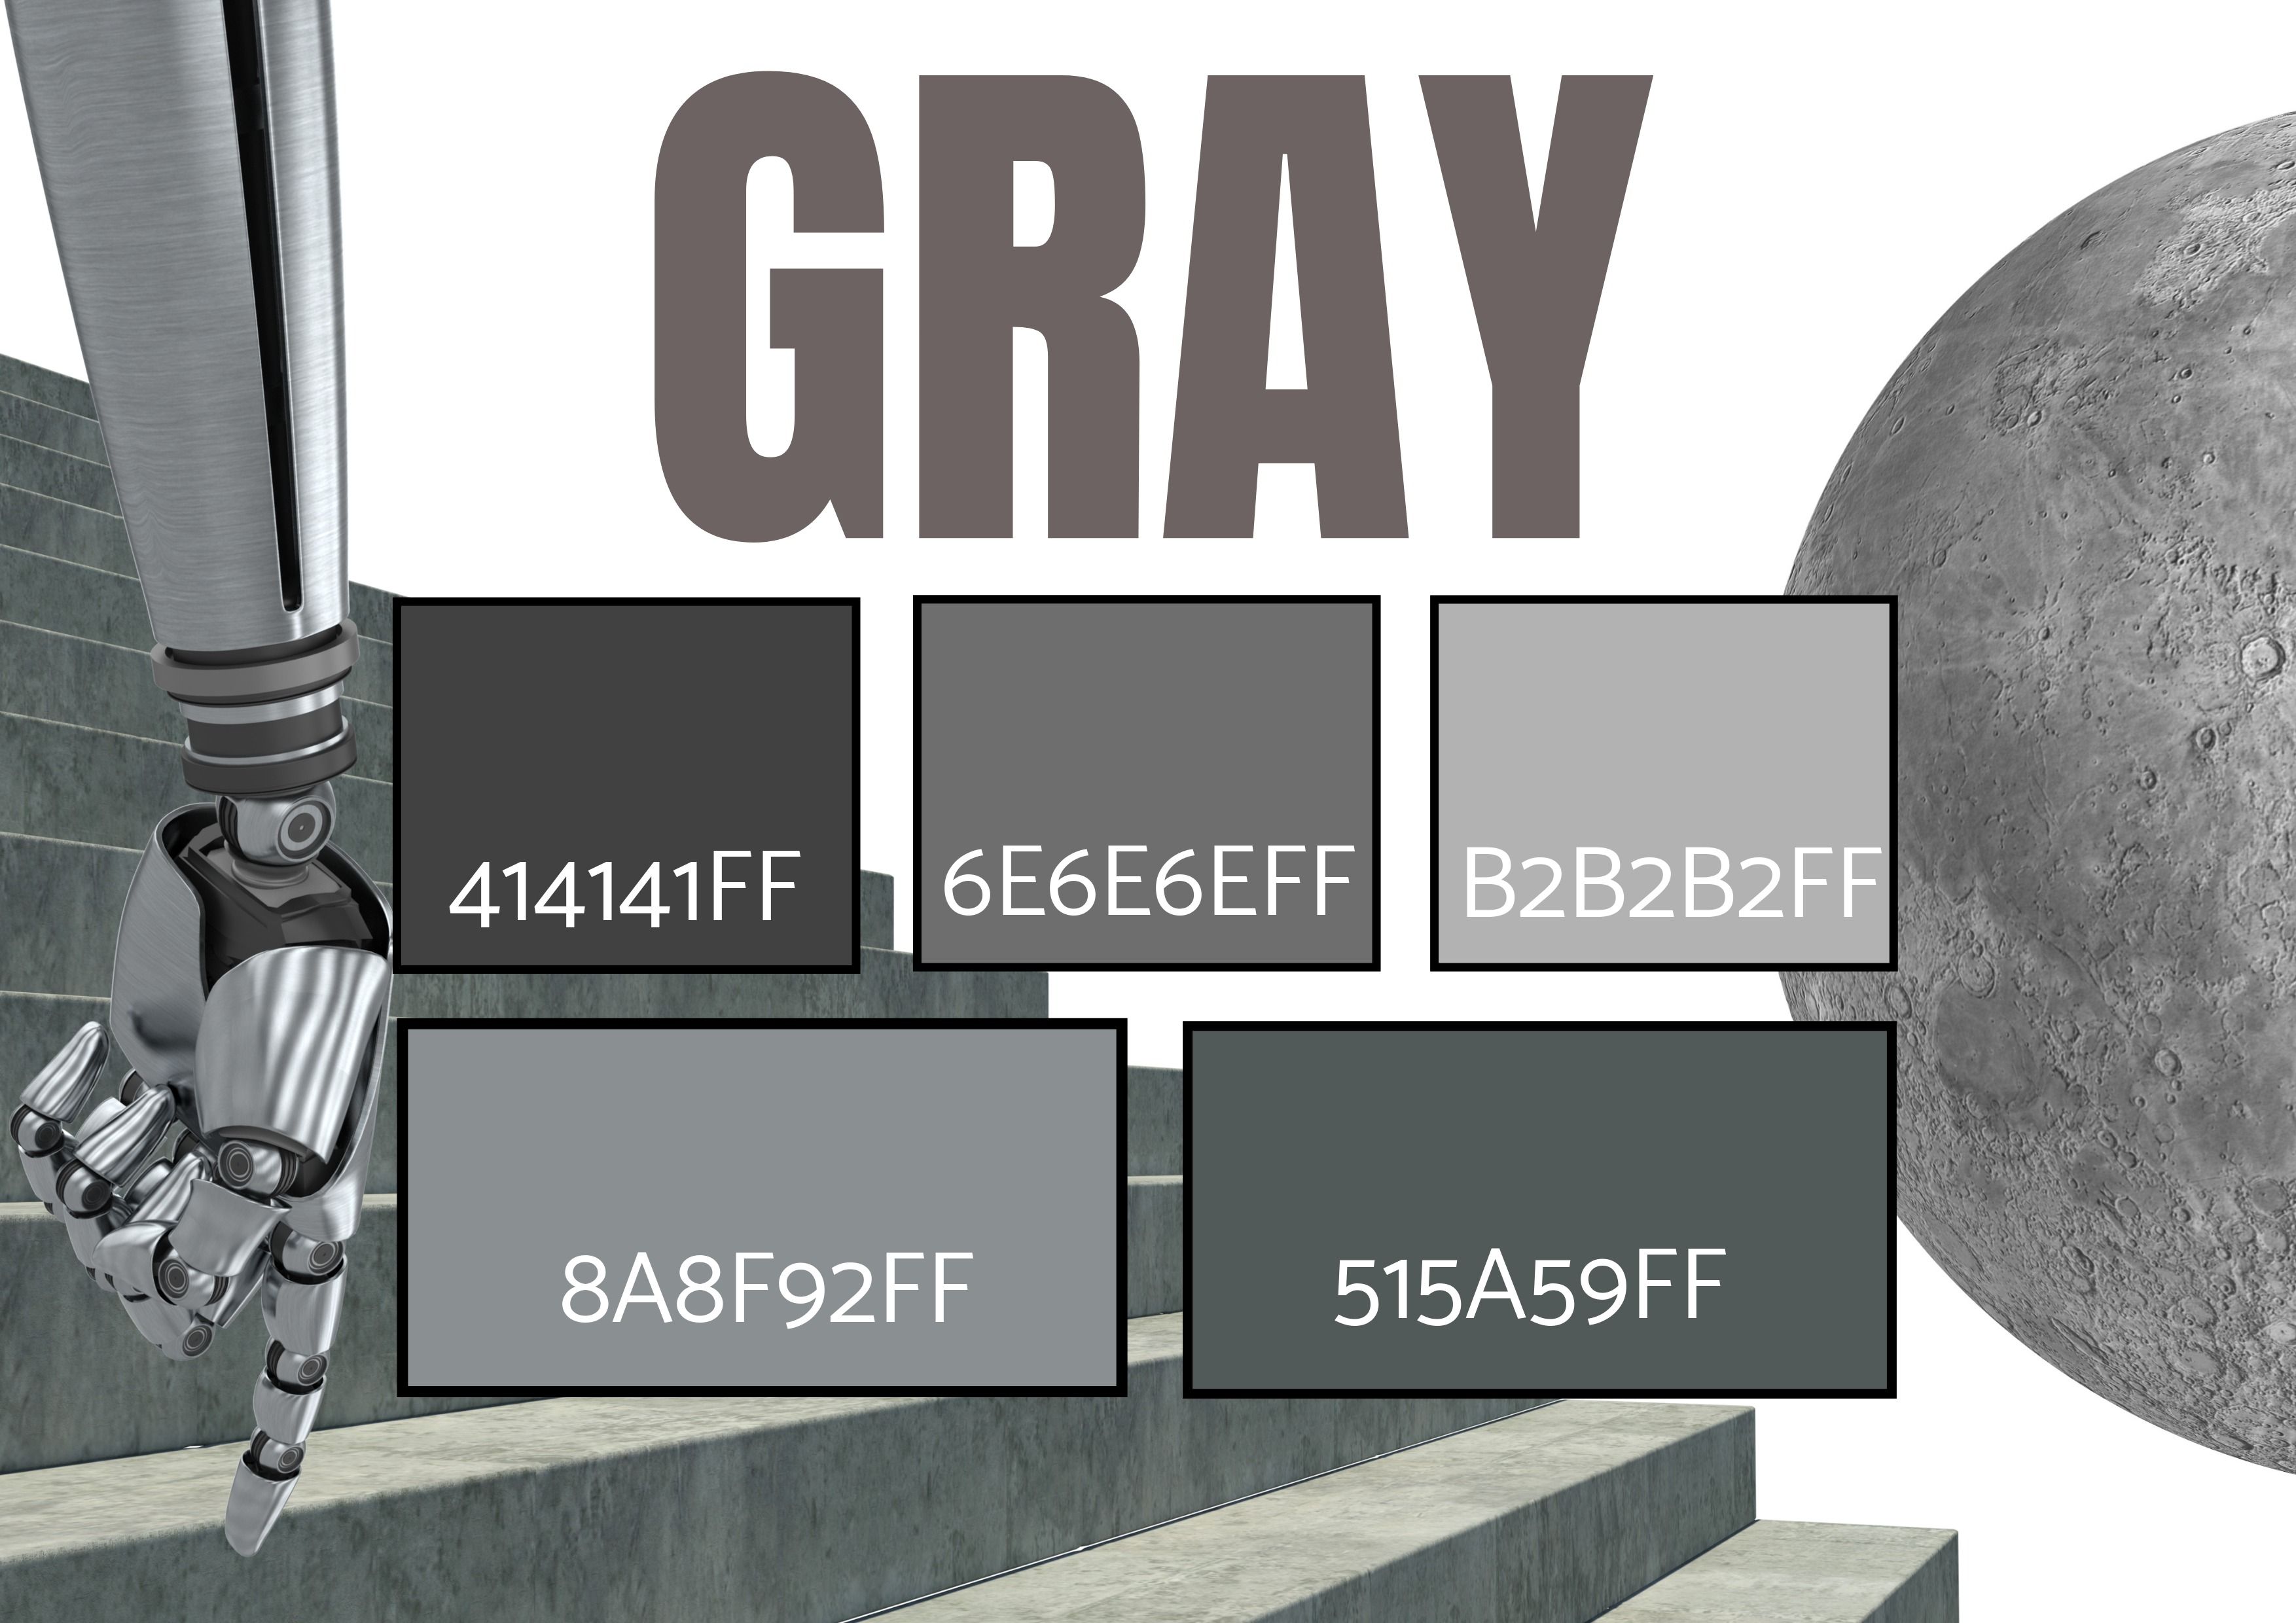 Selection of 5 Gray Shades with images of a robot arm, stairs and the moon - symbolism - Color theory for designers: The art of using color symbolism - Image